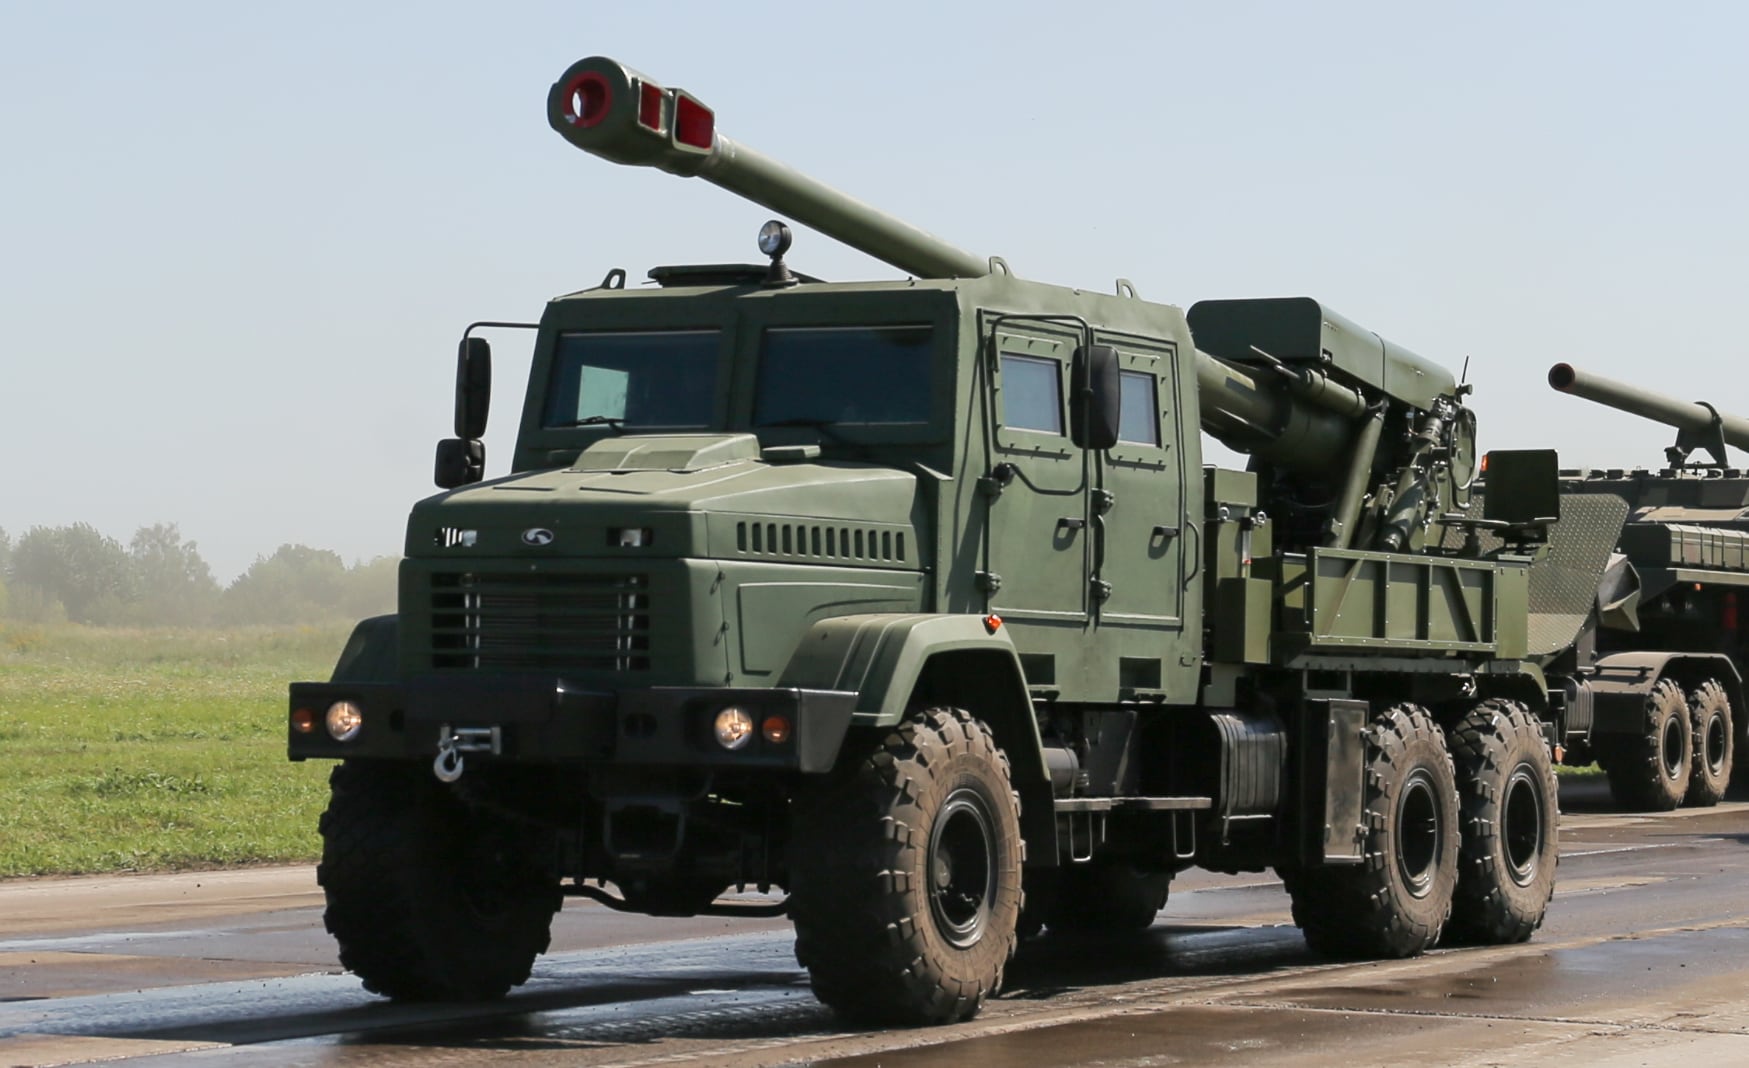 President Zelenskyy said that in April 2014, Ukraine will produce 10 Bohdan air defence systems, which is more than France produces CAESAR air defence systems